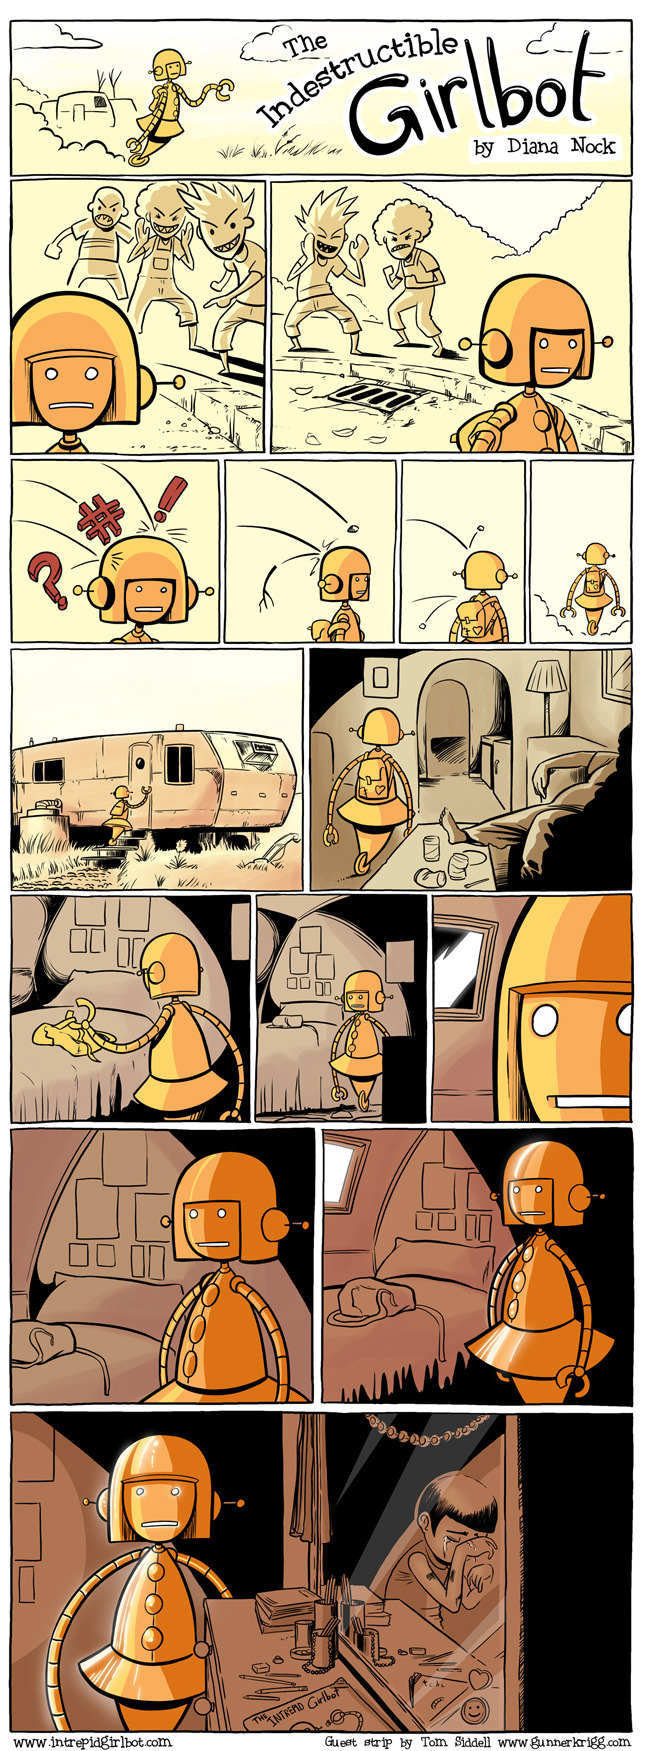 A comic showing people teasing and throwing rocks at a robot. The robot does not respond. In the final frame you can see the robot's reflection in the mirror, showing that it's actually a crying child.